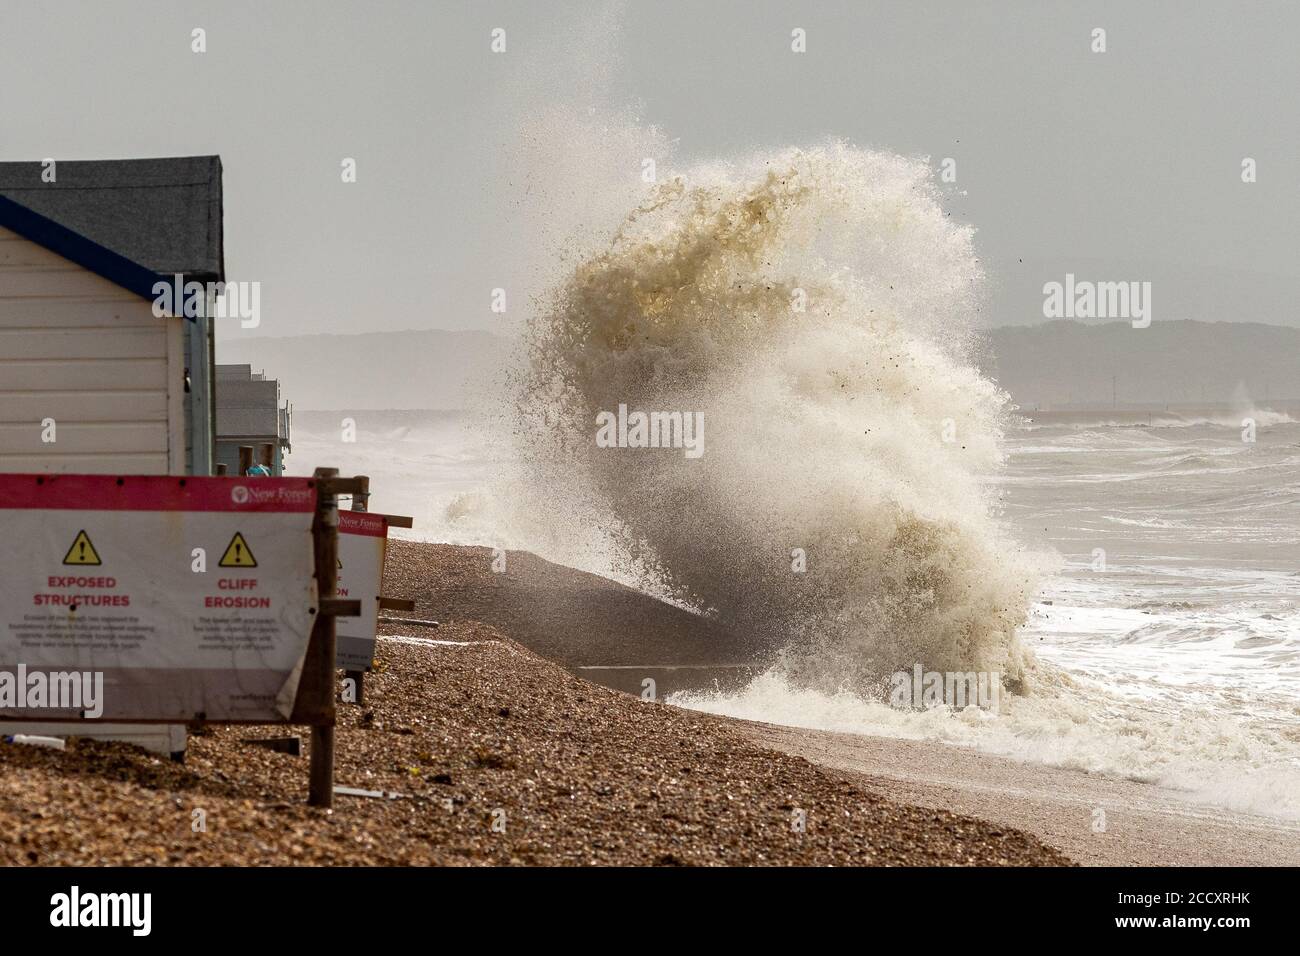 Crashing wave close to beach huts at Milford-on-Sea, Hampshire during Storm Ellen Stock Photo